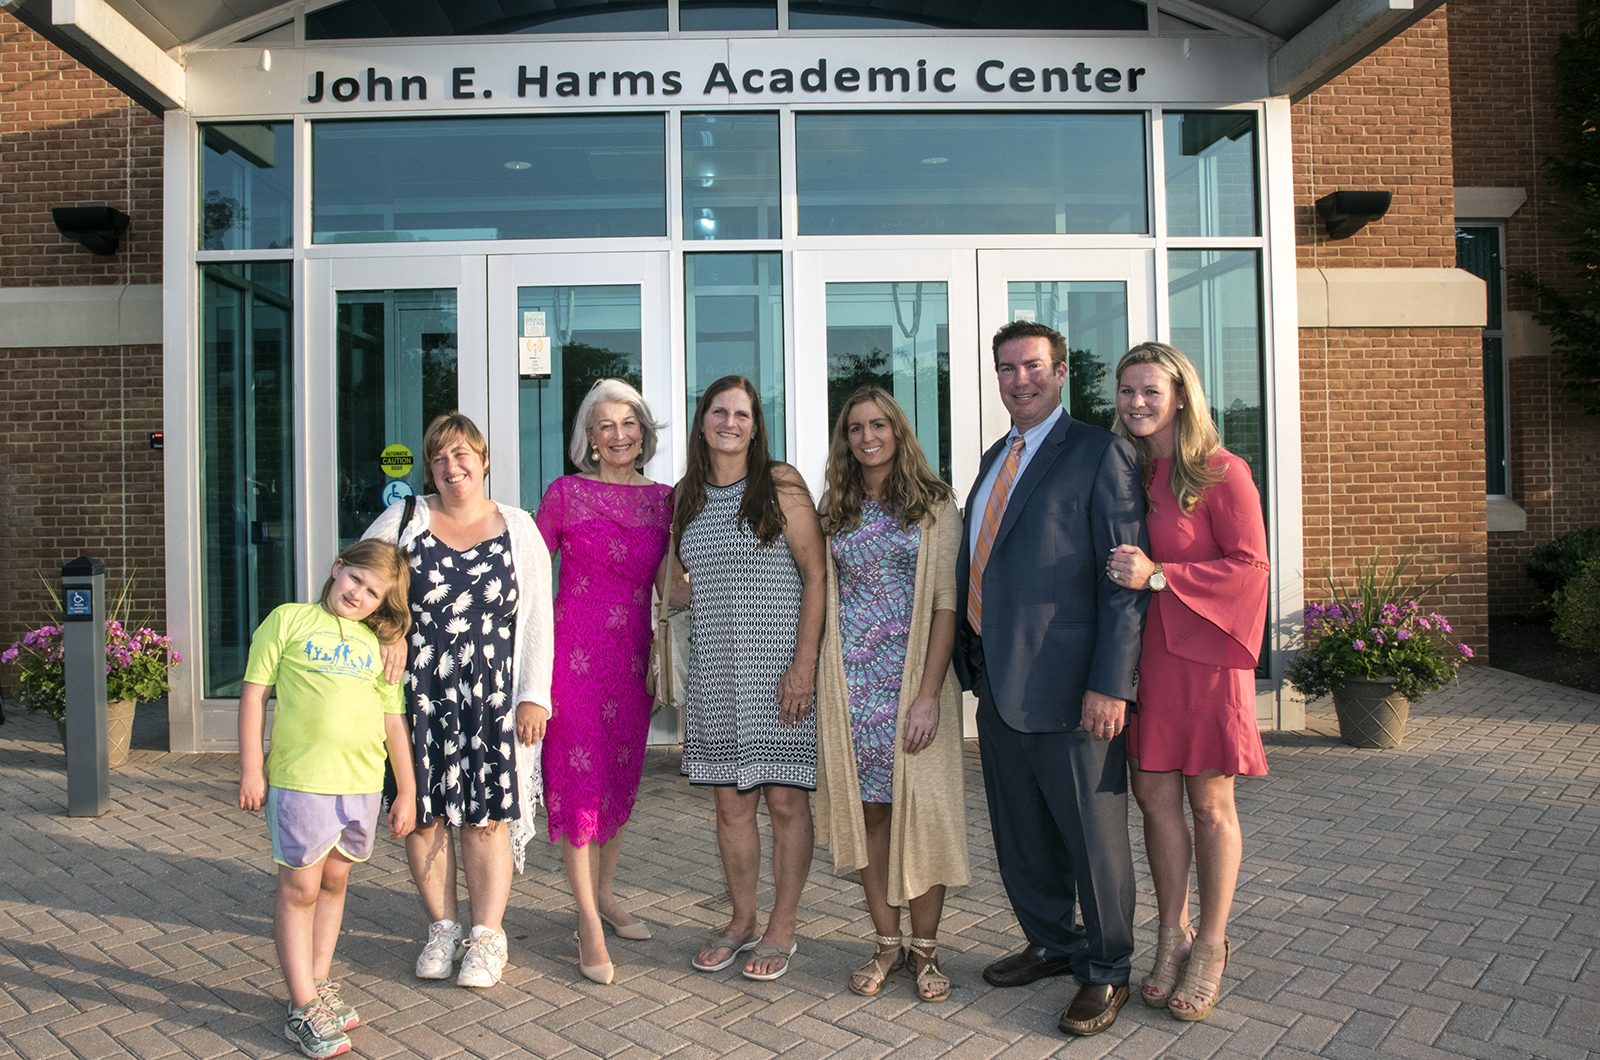 Family members, including, from left, Taylor Ann Bowen, Julie Bowen, Marianne Harms, Peggy Denton, Jennifer Lund and Gordon Buchanan and Courtney Buchanan, stand in front of the newly named John E. Harms Academic Center at CSM’s Prince Frederick Campus.